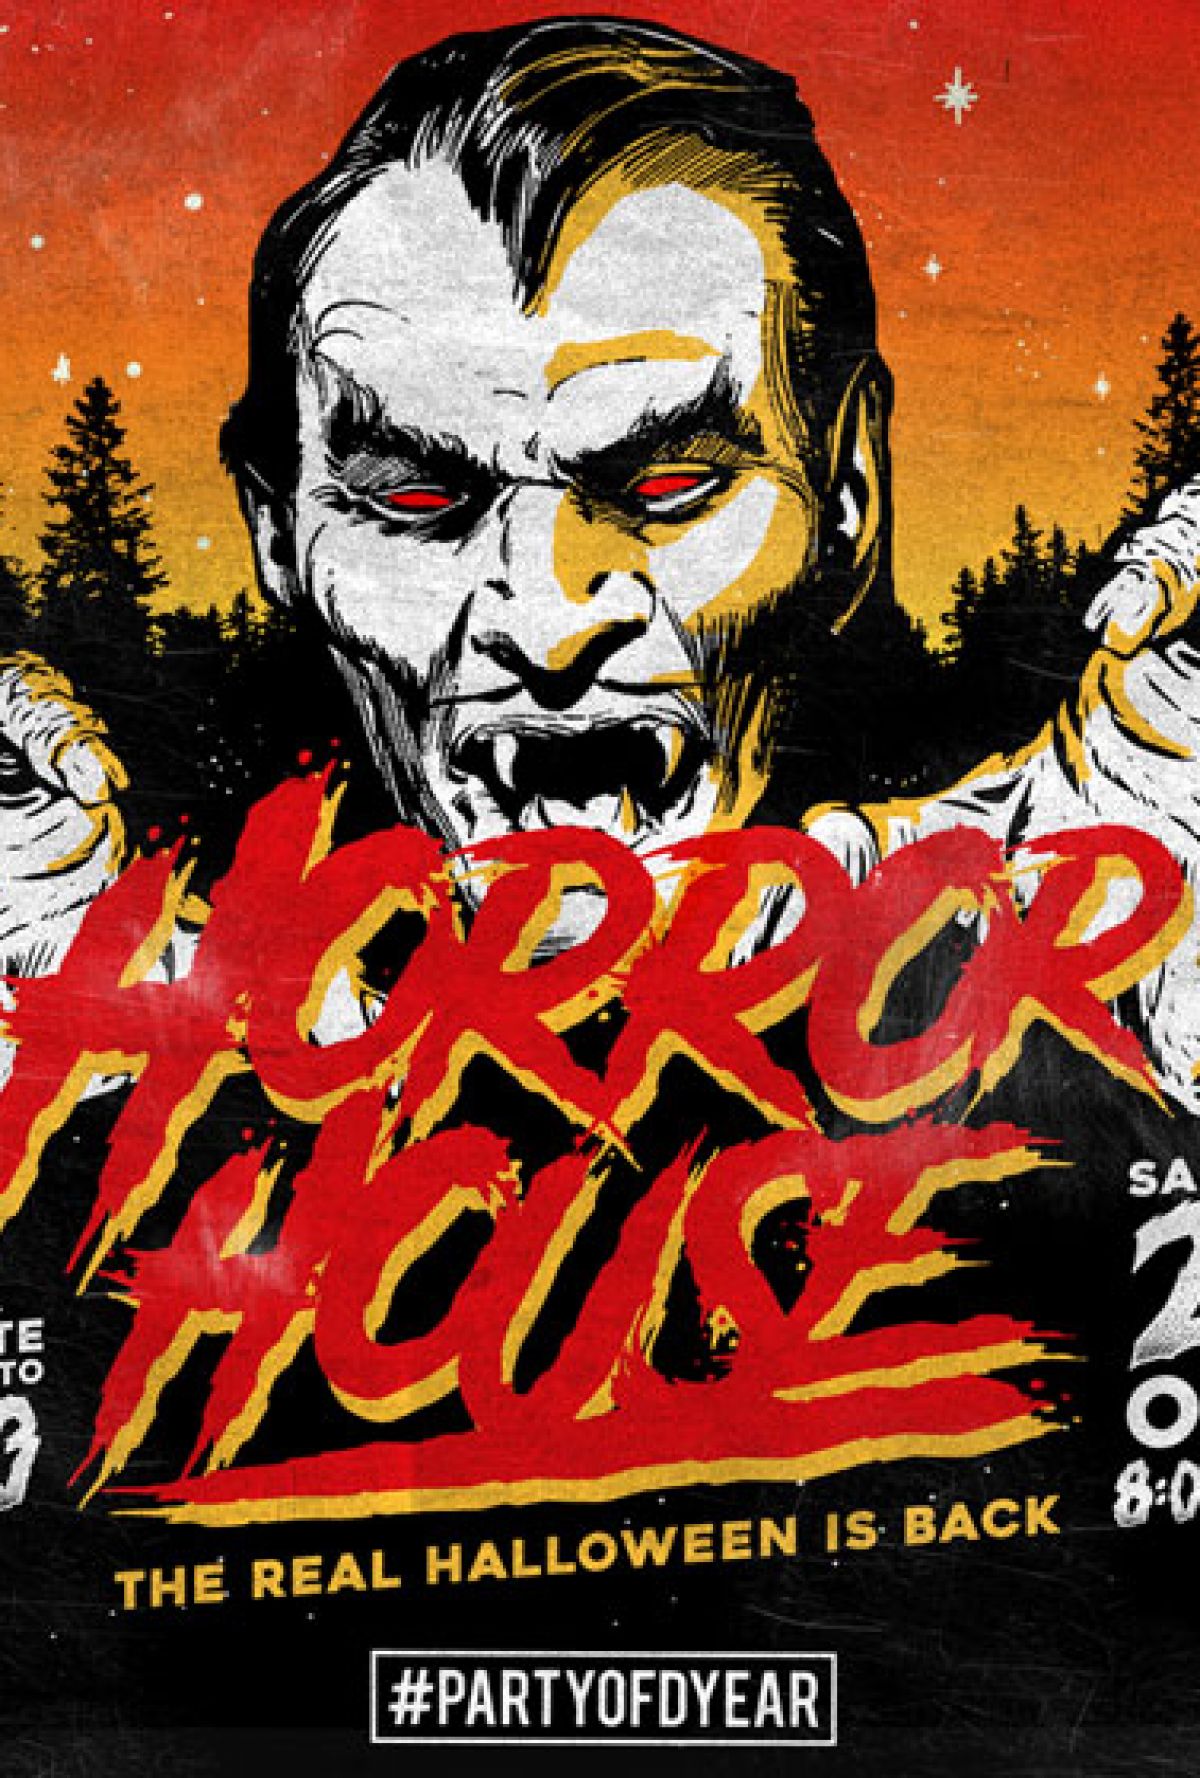 HORROR HOUSE V2 BY #PARTYOFDYEAR